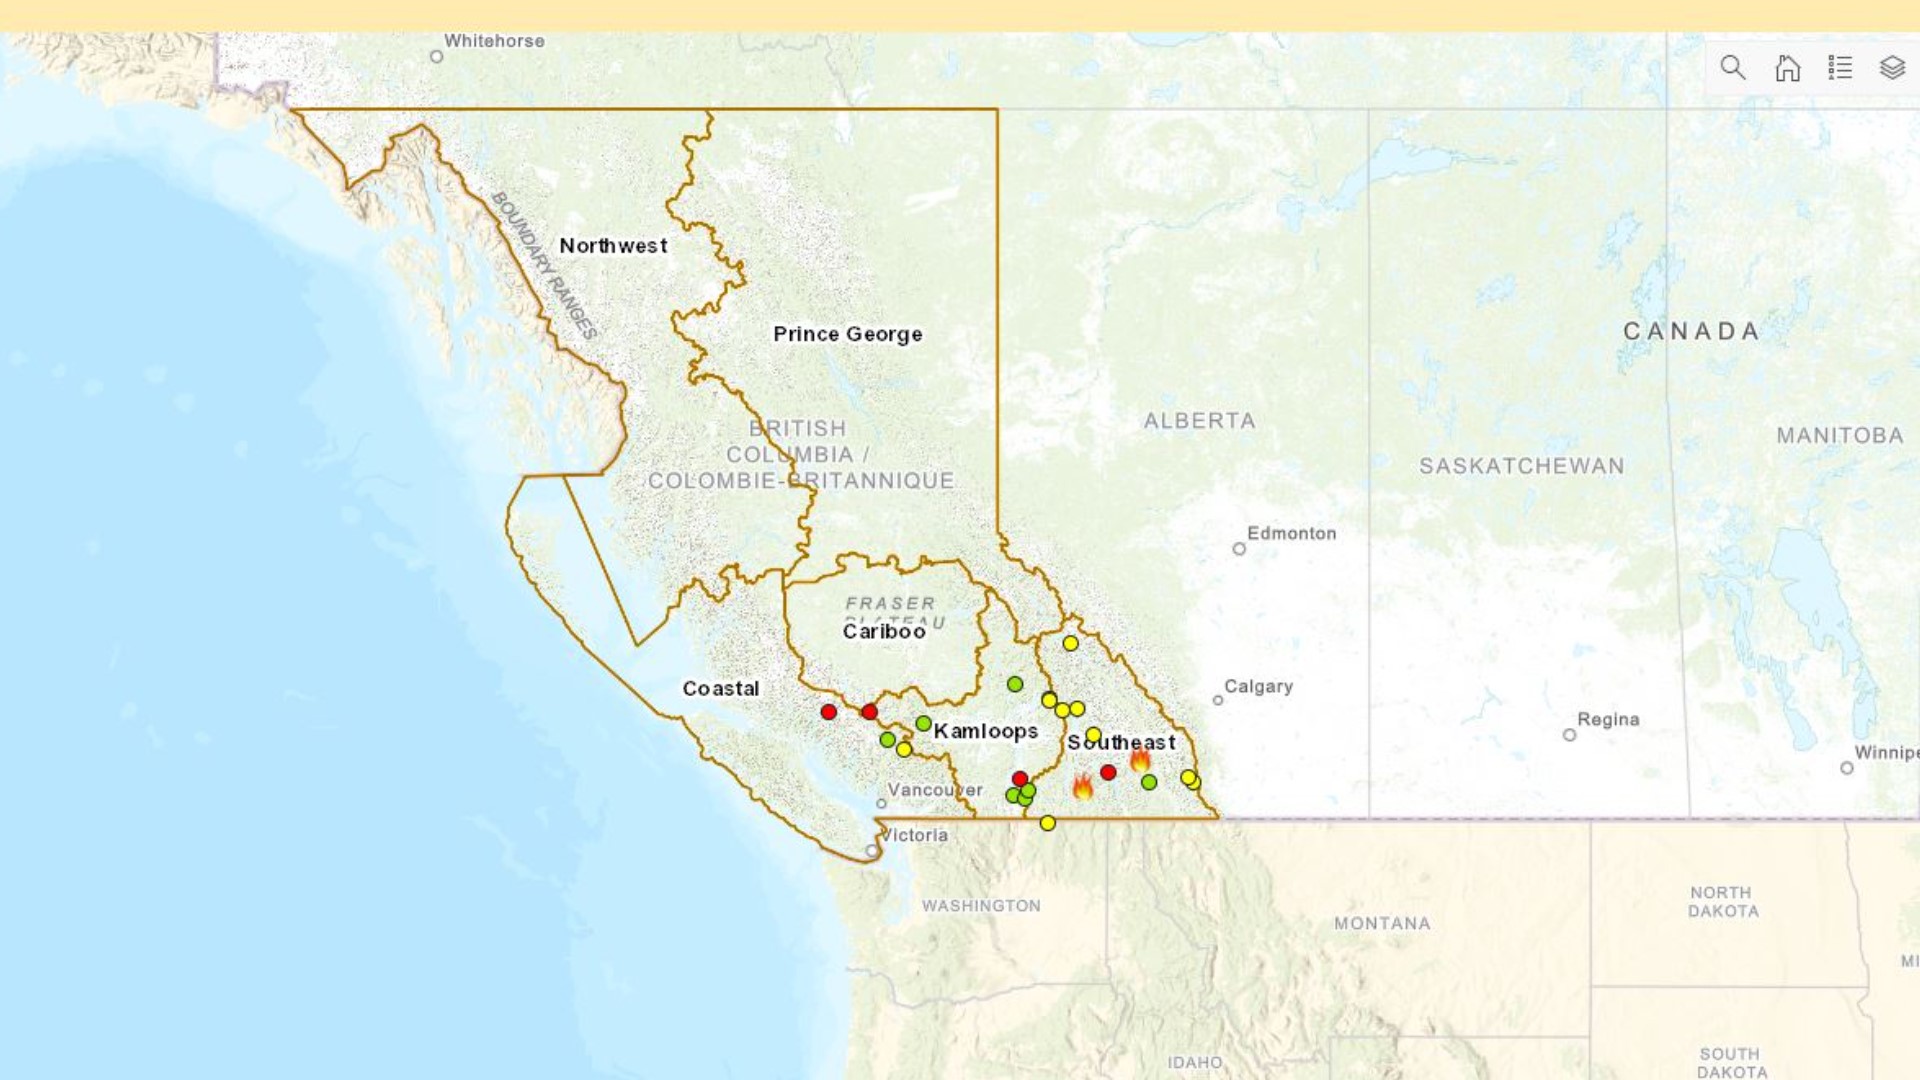 West Coast Wild Fires Map Do The Wildfires Stop In Canada